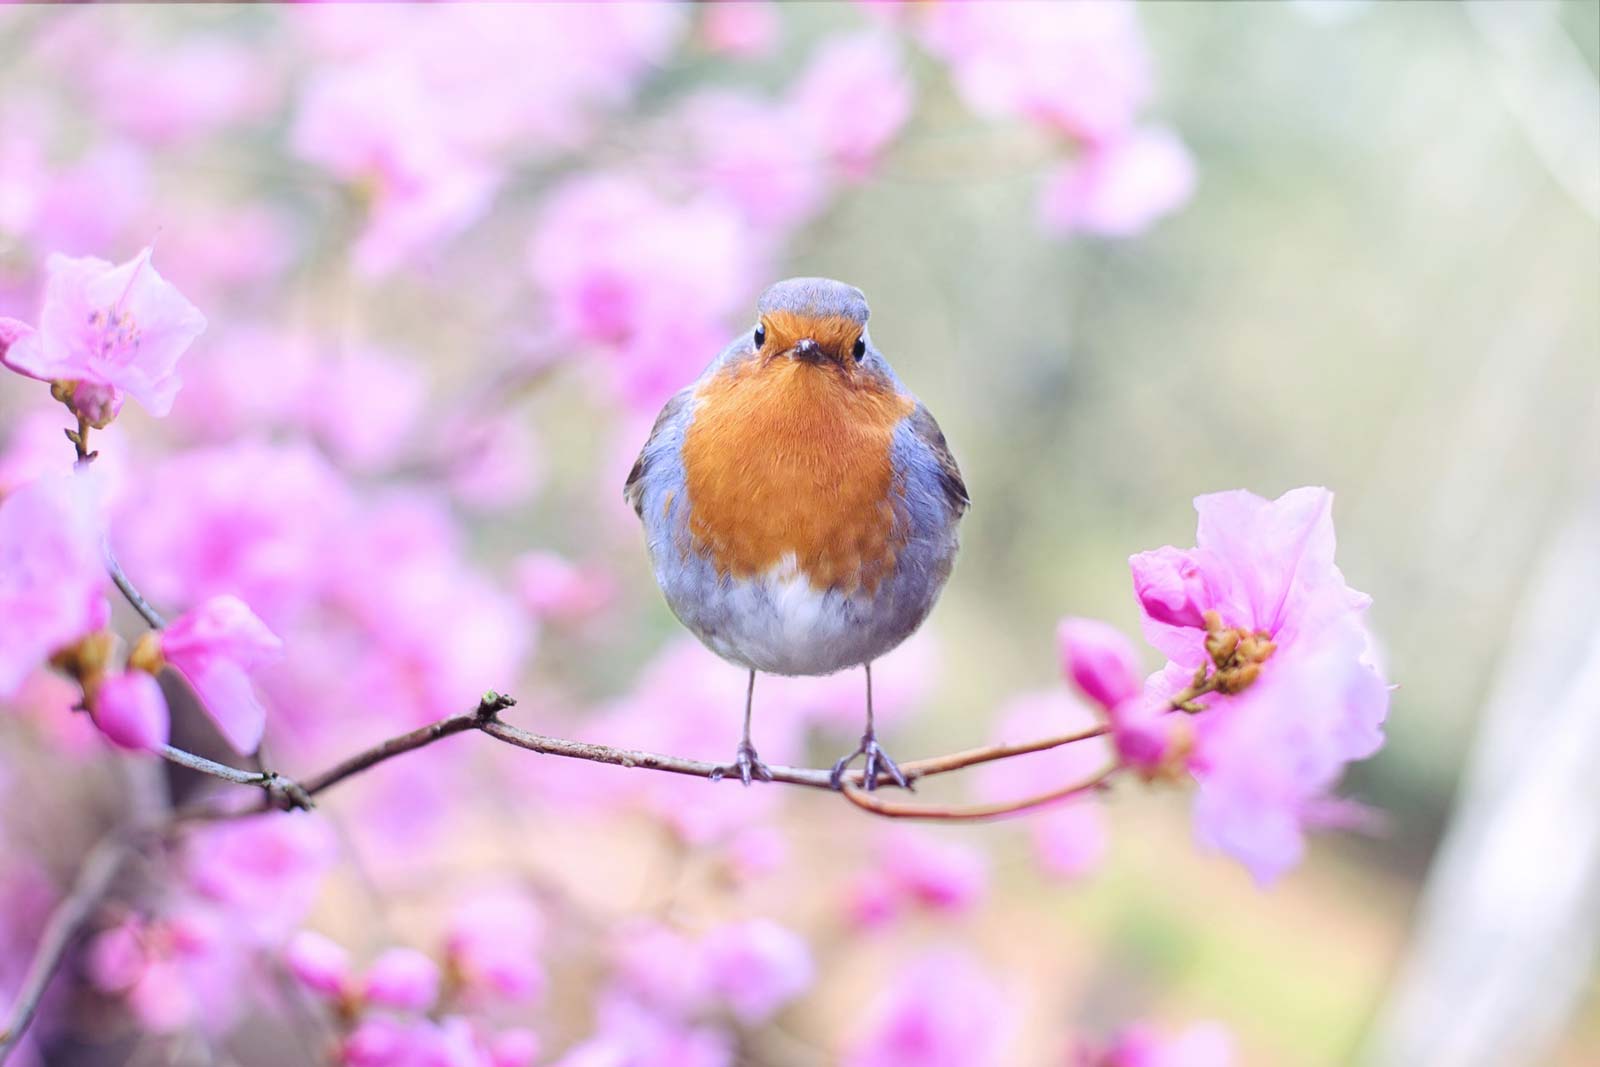 Image of a fat orange bird on a branch in front of pink blossoms